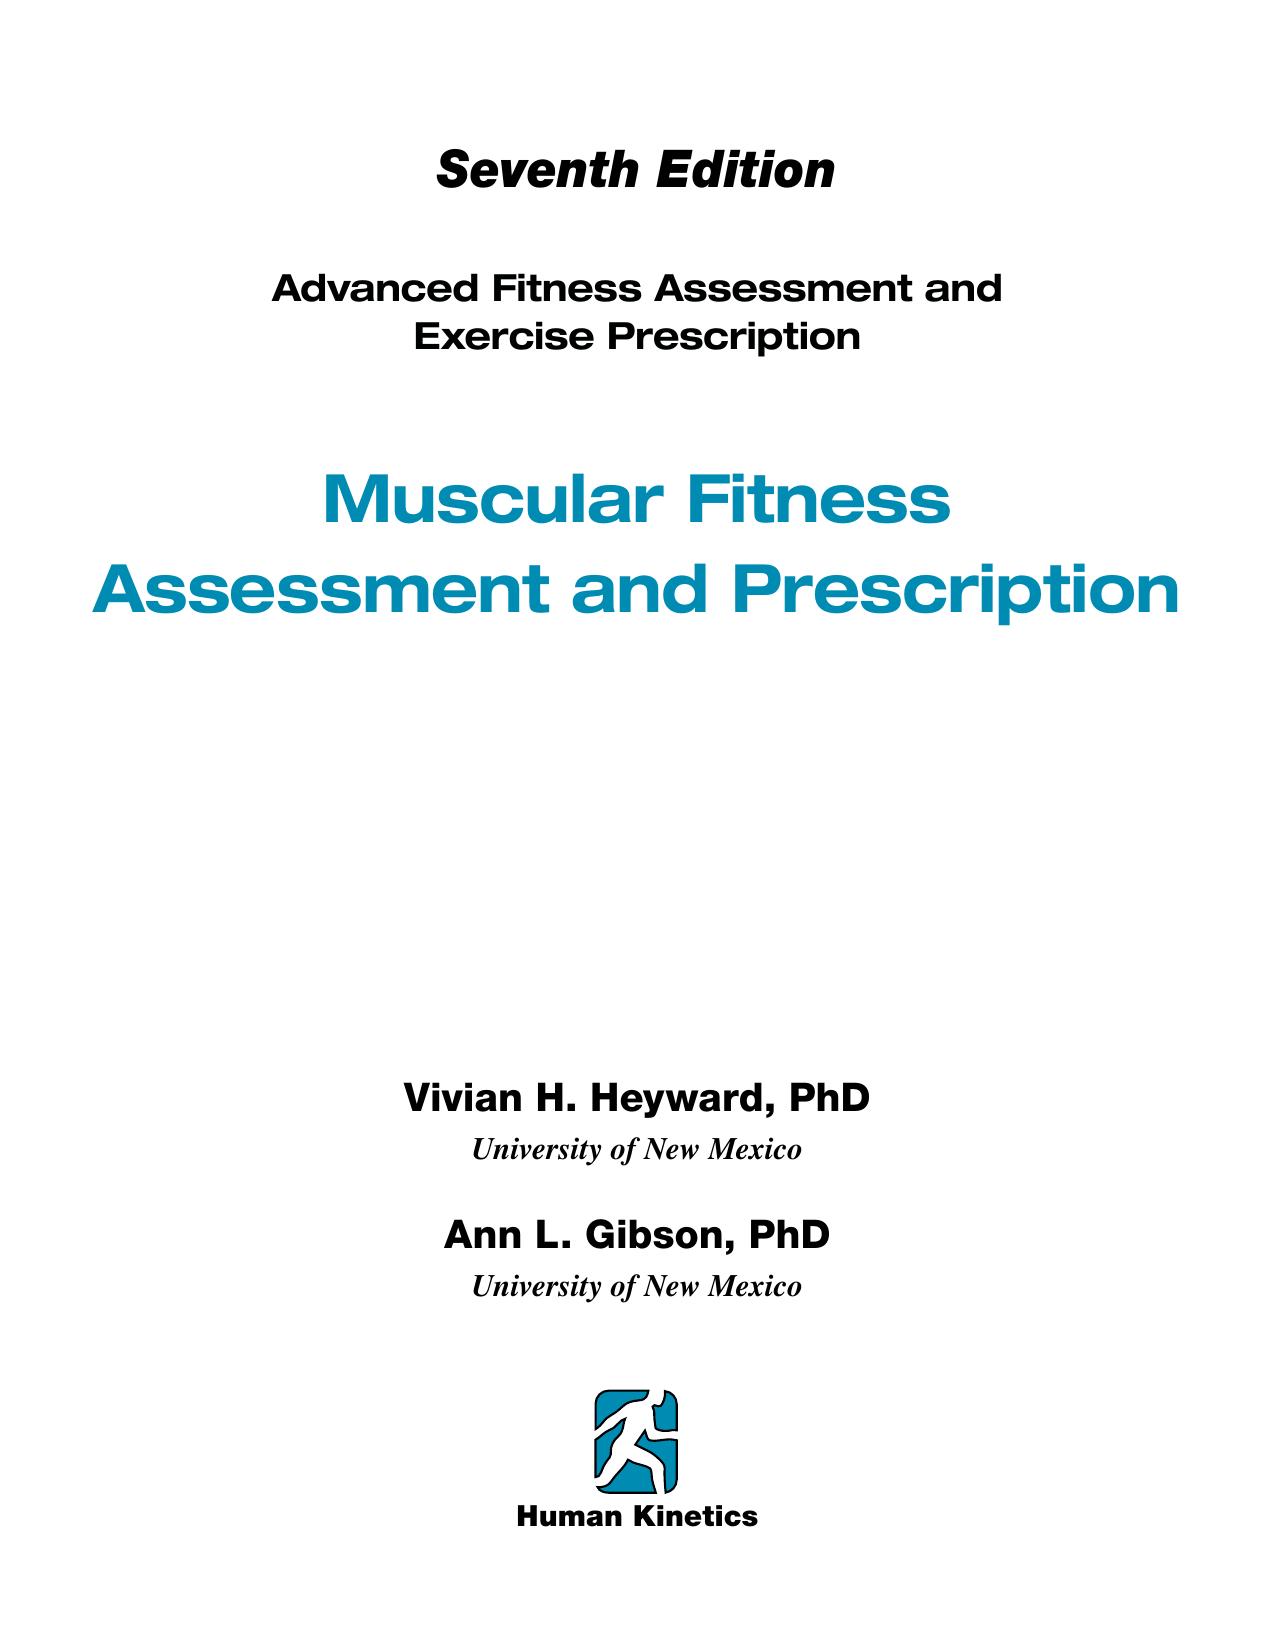 Muscular Fitness Assessment and Prescription Online CE Course Text